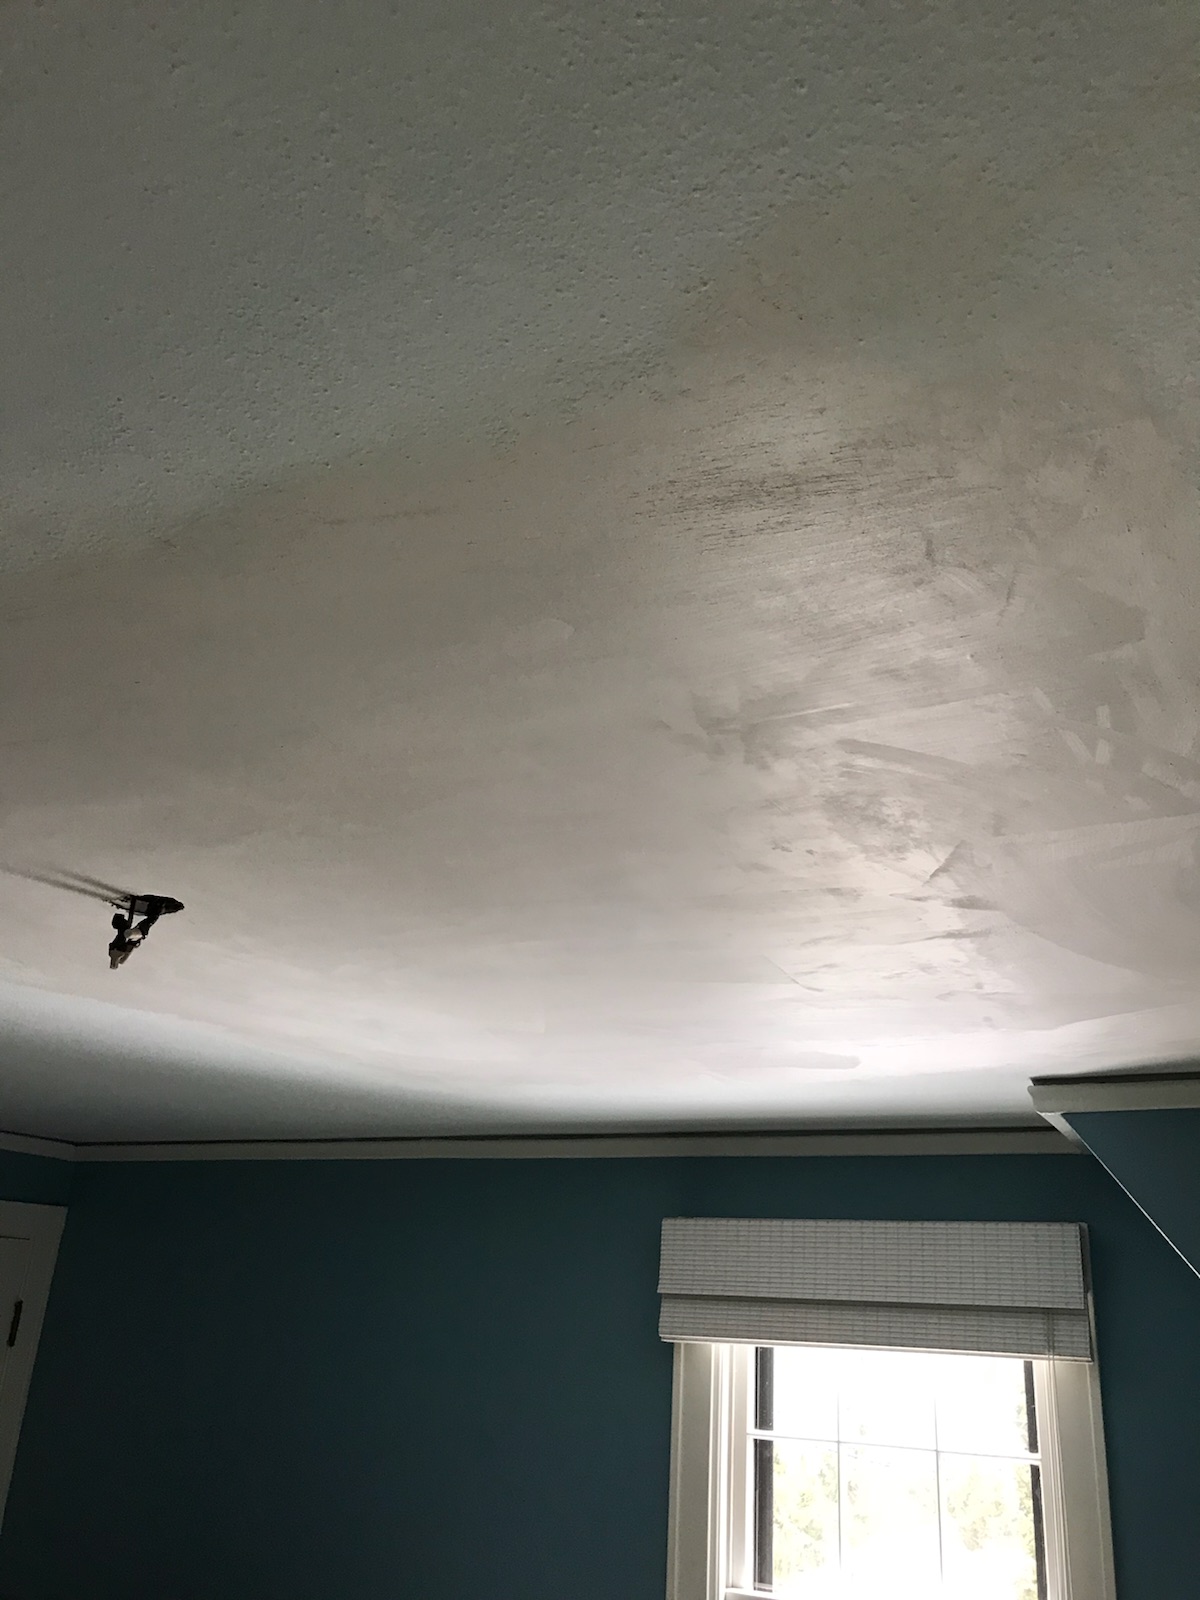 finished ceiling, all patched up